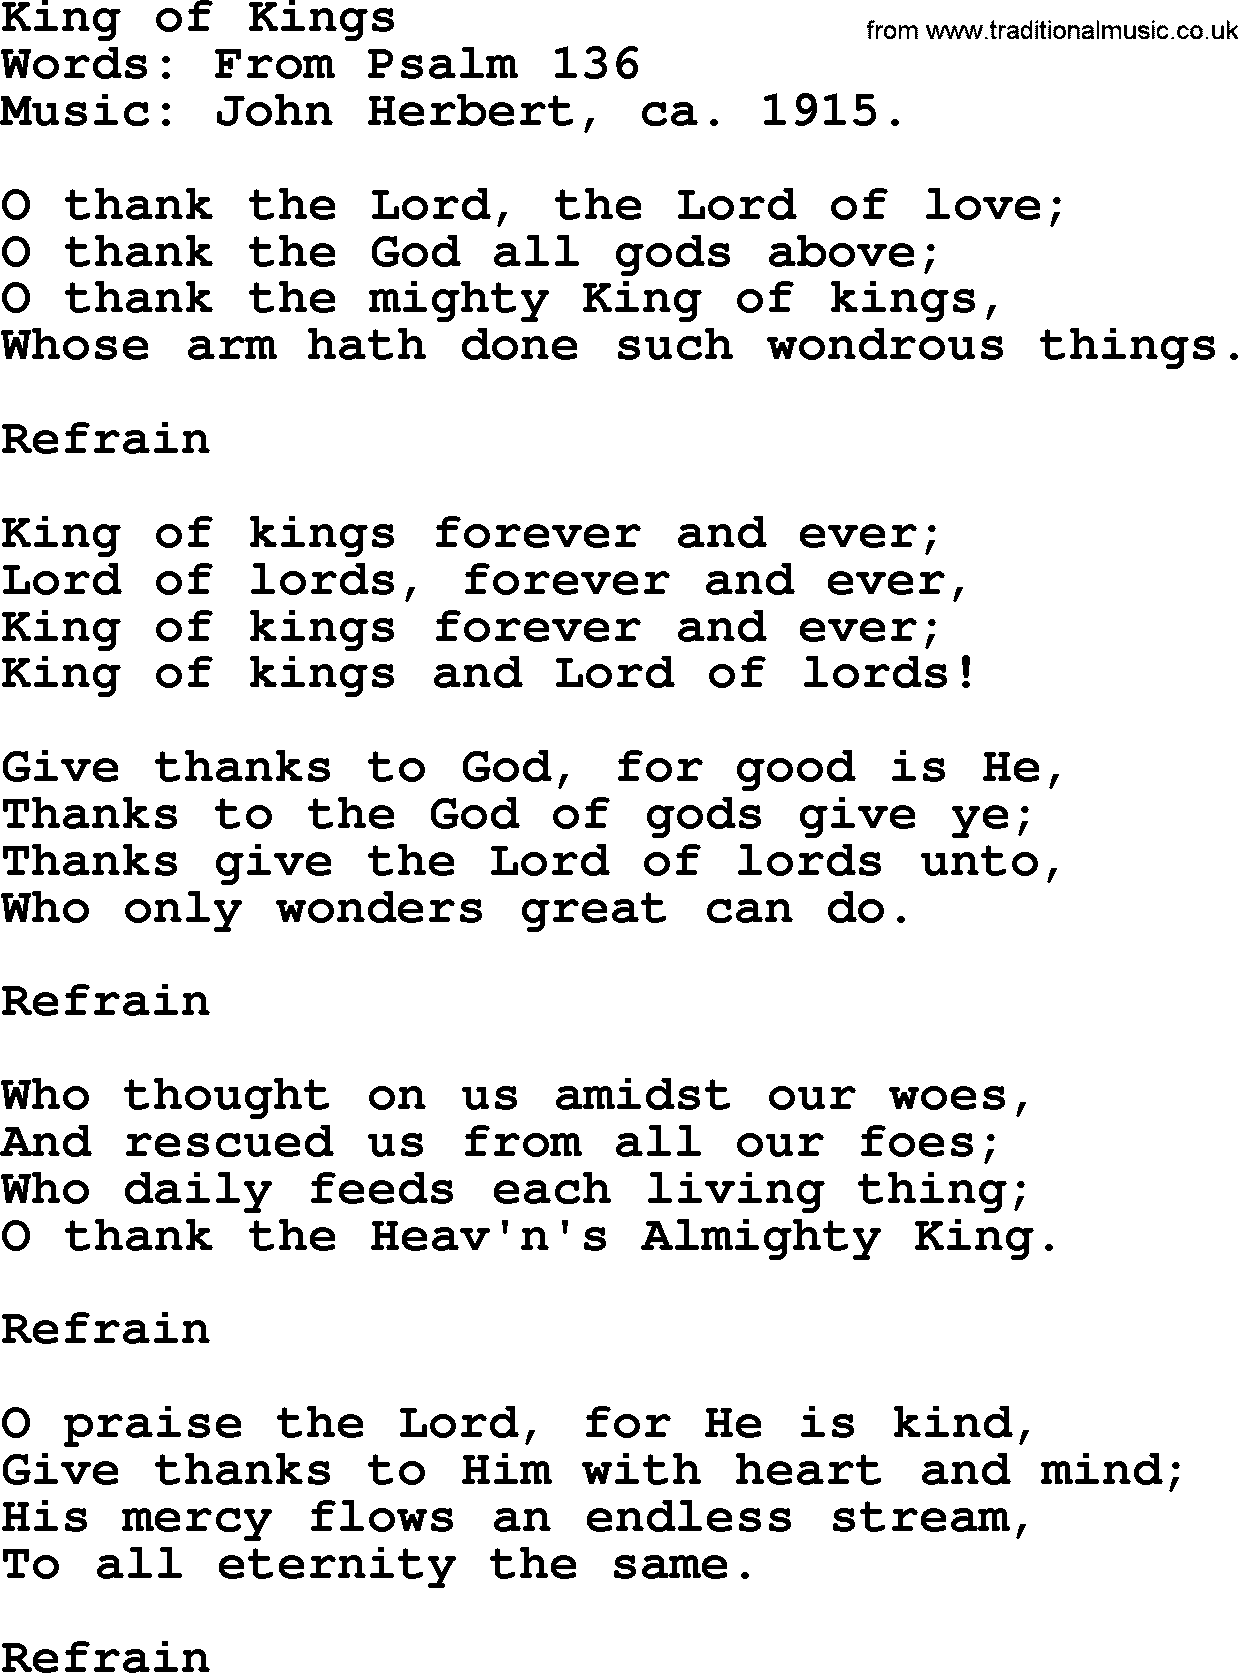 Thanksgiving Hymns and Songs: King Of Kings lyrics with PDF